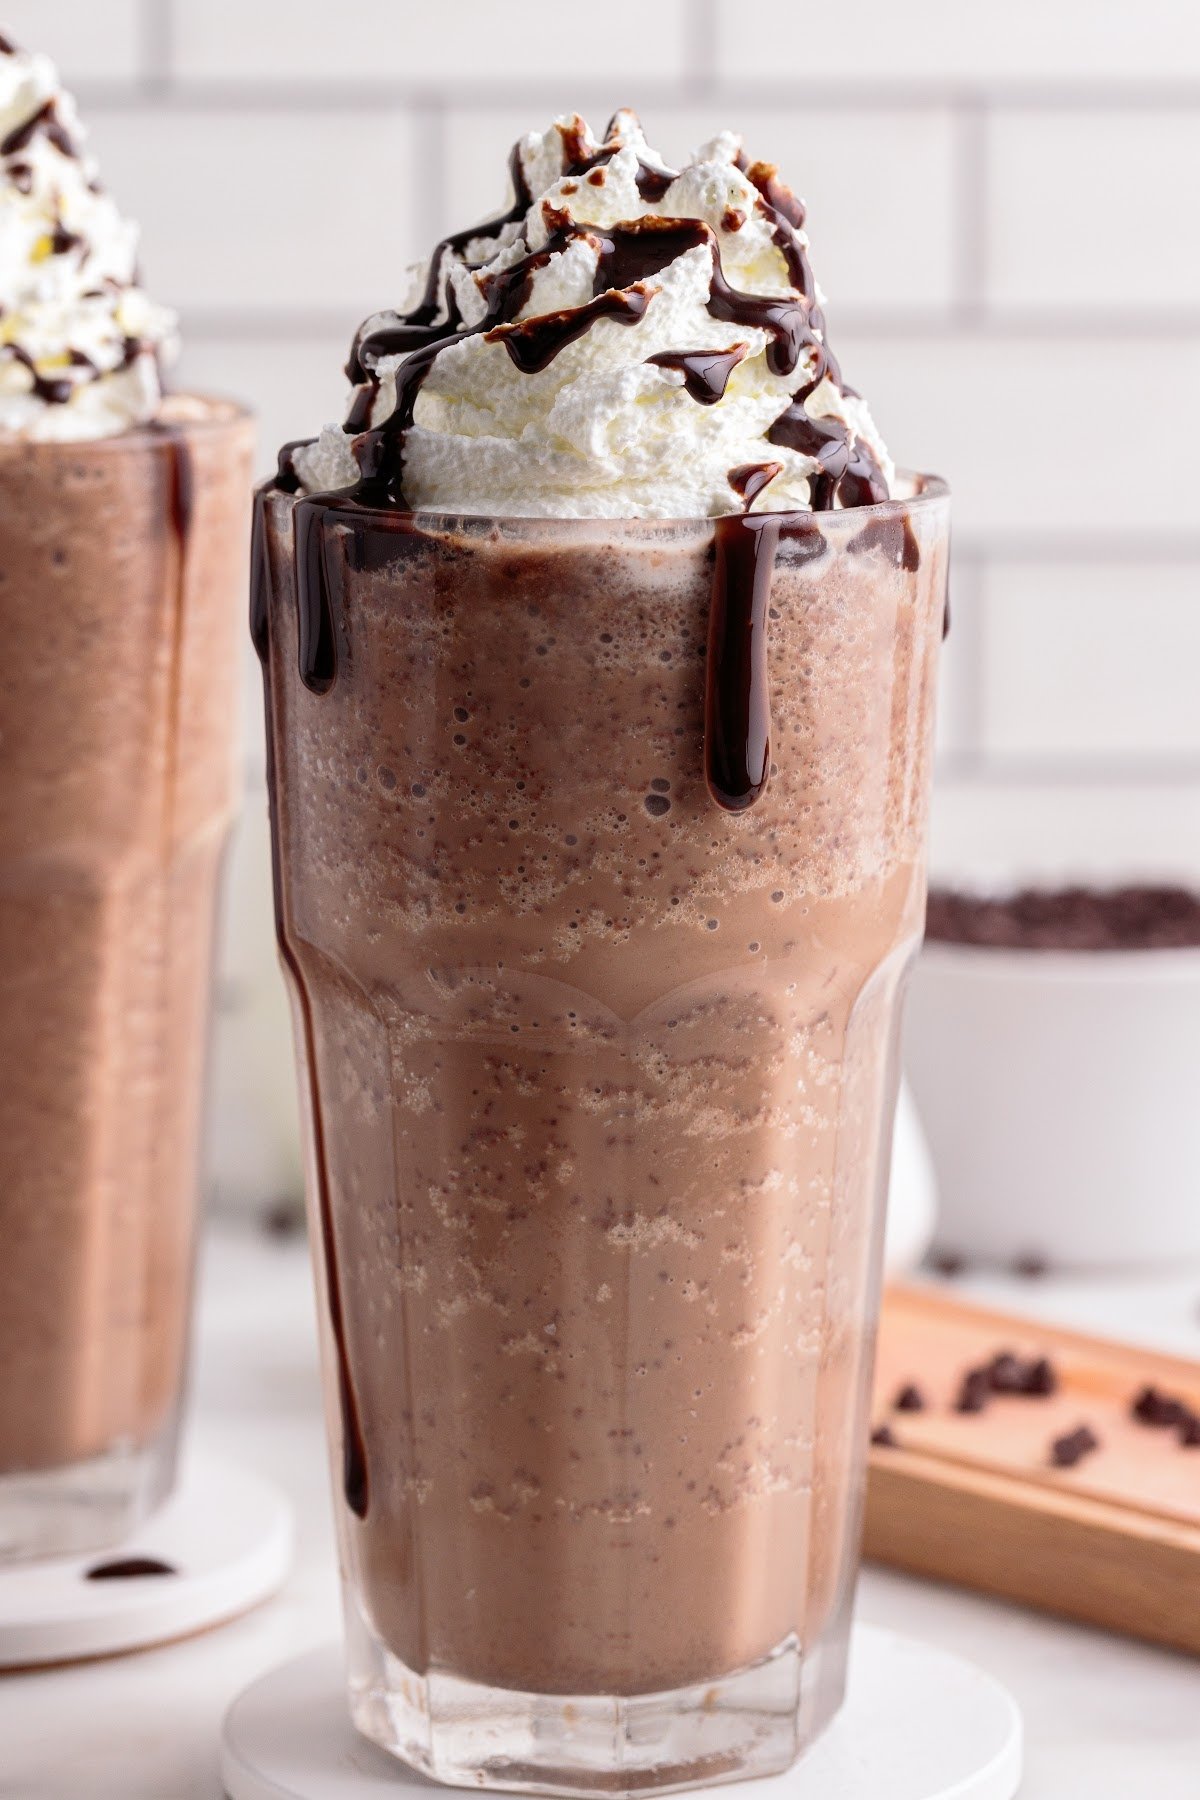 Double chocolate chip frappuccino in a glass with whipped cream and chocolate drizzle.